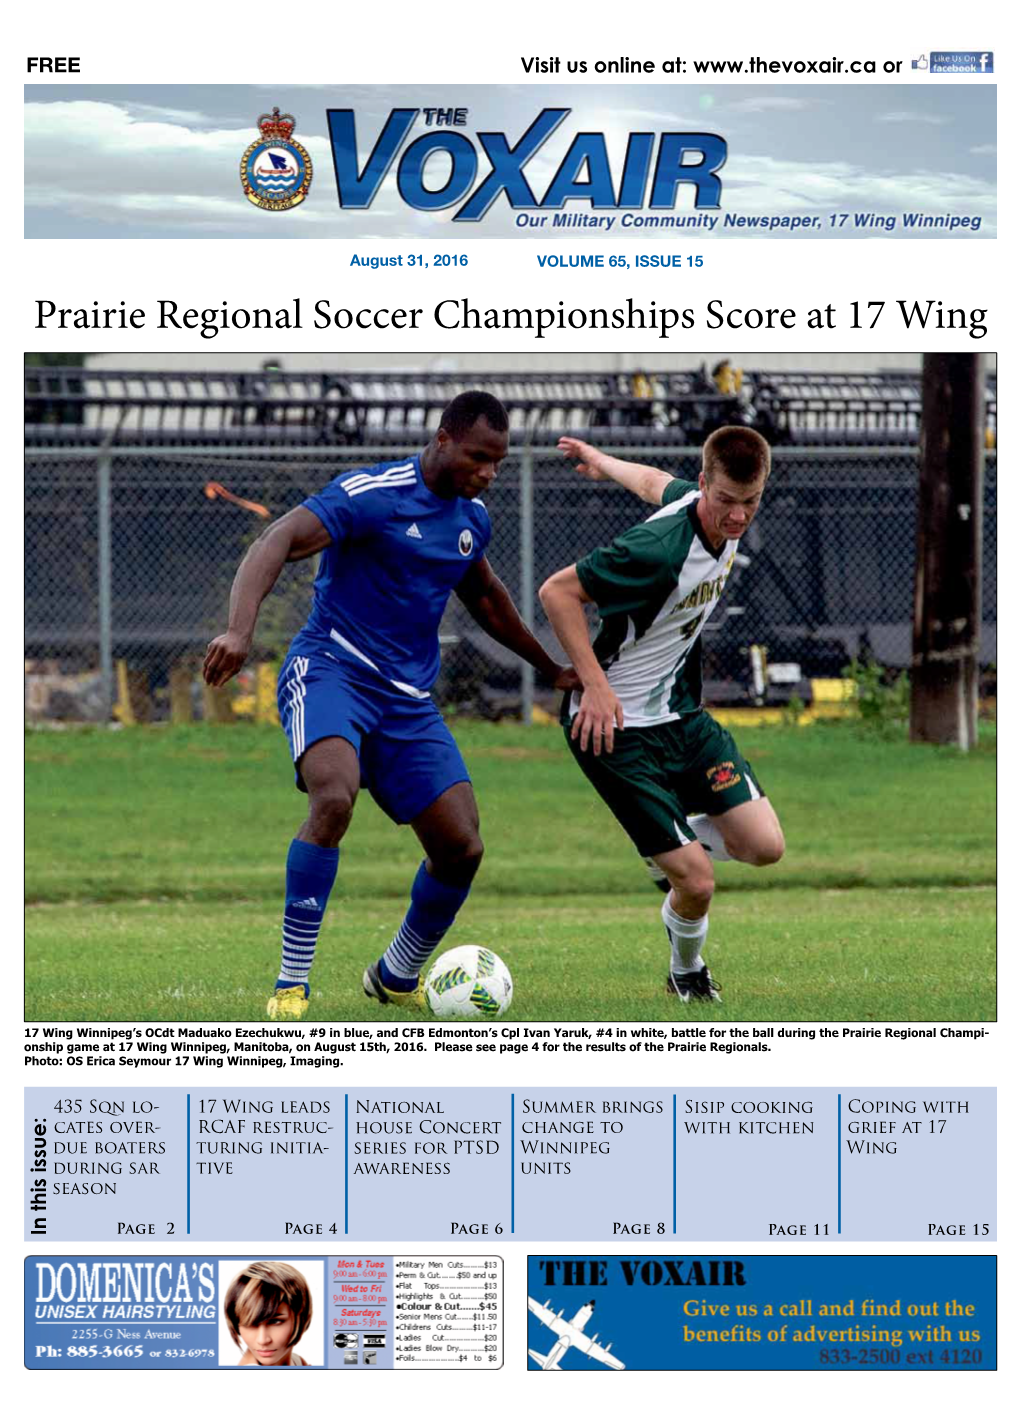 Prairie Regional Soccer Championships Score at 17 Wing